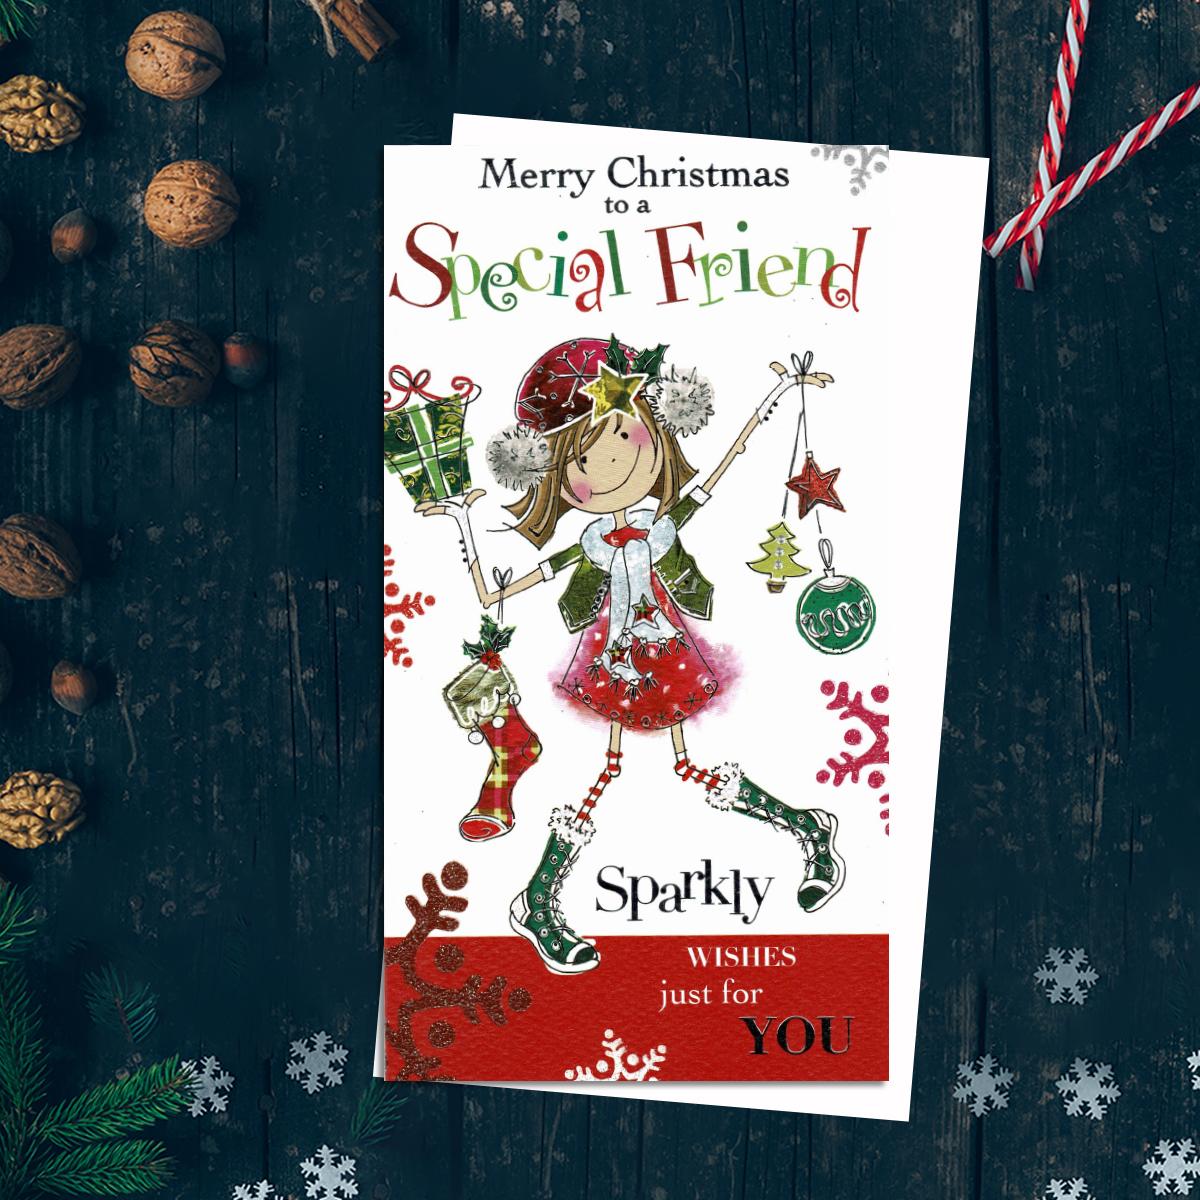 Merry Christmas Special Friend Sparkly Wishes Just For You Featuring A Cartoon Drawn Young Girl With Baubles,